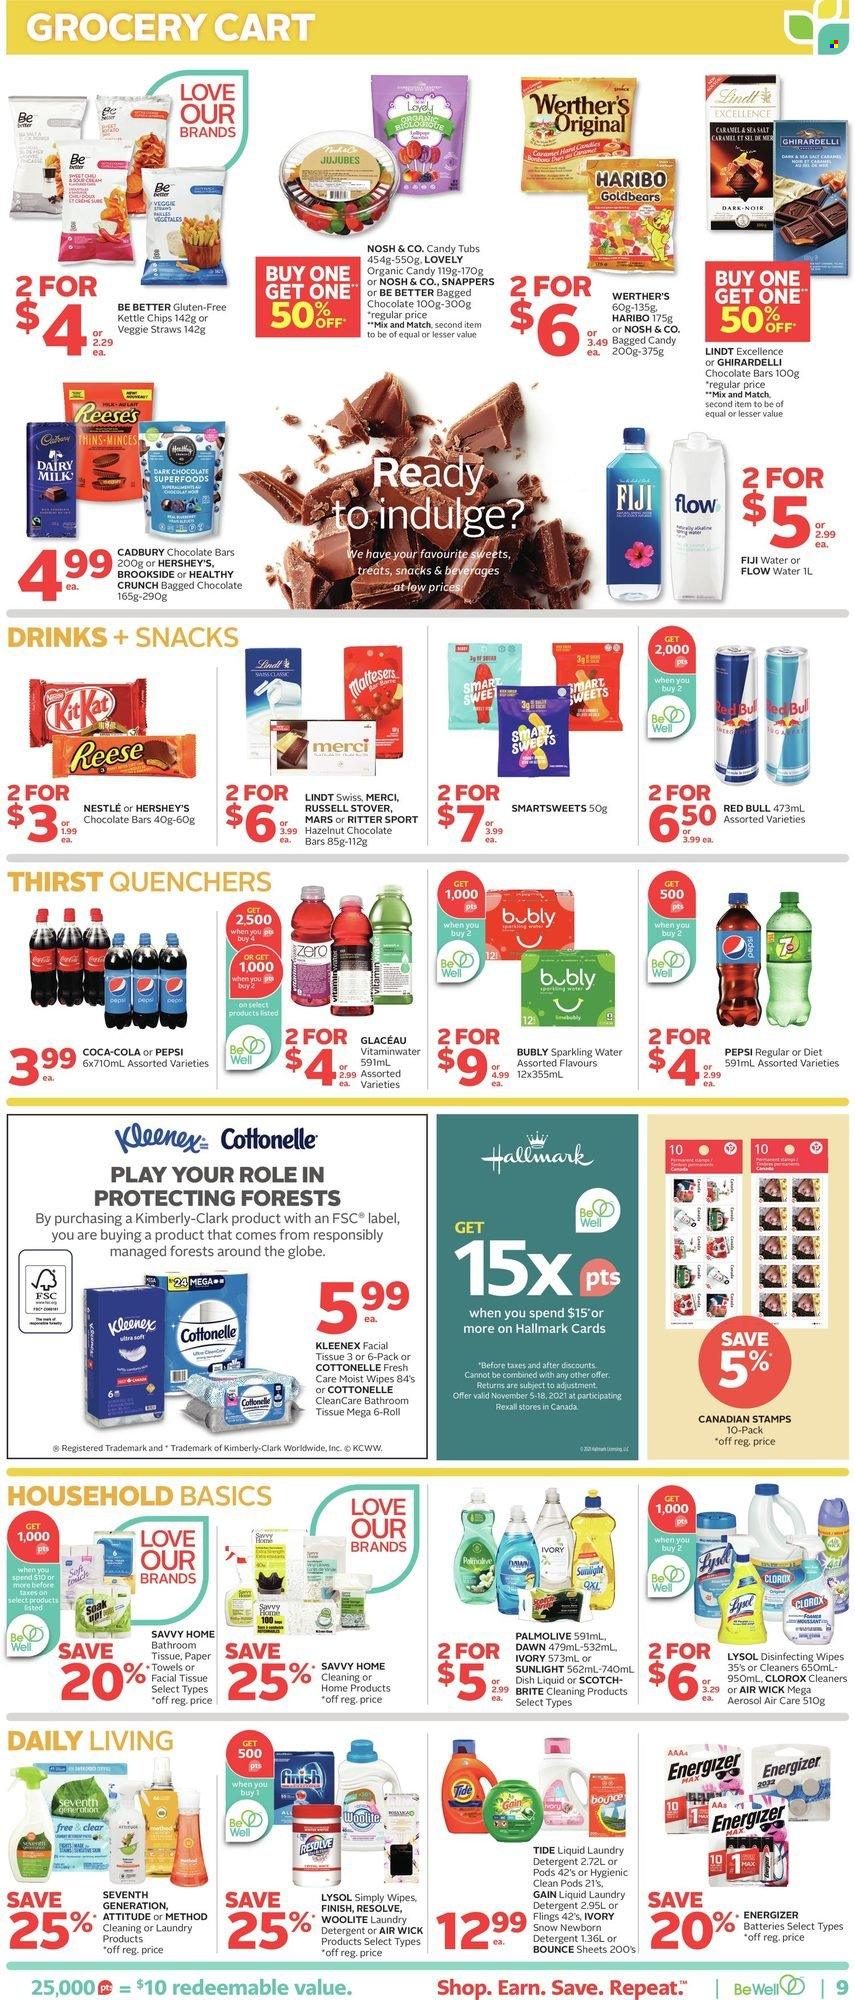 thumbnail - Rexall Flyer - November 12, 2021 - November 18, 2021 - Sales products - snack, Haribo, Mars, Reese's, Hershey's, dark chocolate, Cadbury, Merci, Dairy Milk, Ritter Sport, Ghirardelli, chocolate bar, Thins, Veggie Straws, Coca-Cola, Pepsi, Red Bull, flavored water, sparkling water, wipes, bath tissue, Cottonelle, Kleenex, kitchen towels, paper towels, Gain, Lysol, Clorox, Woolite, Tide, laundry detergent, Sunlight, Bounce, dishwashing liquid, Palmolive, Brite, Air Wick, Nestlé, detergent, Energizer, chips, Lindt. Page 10.